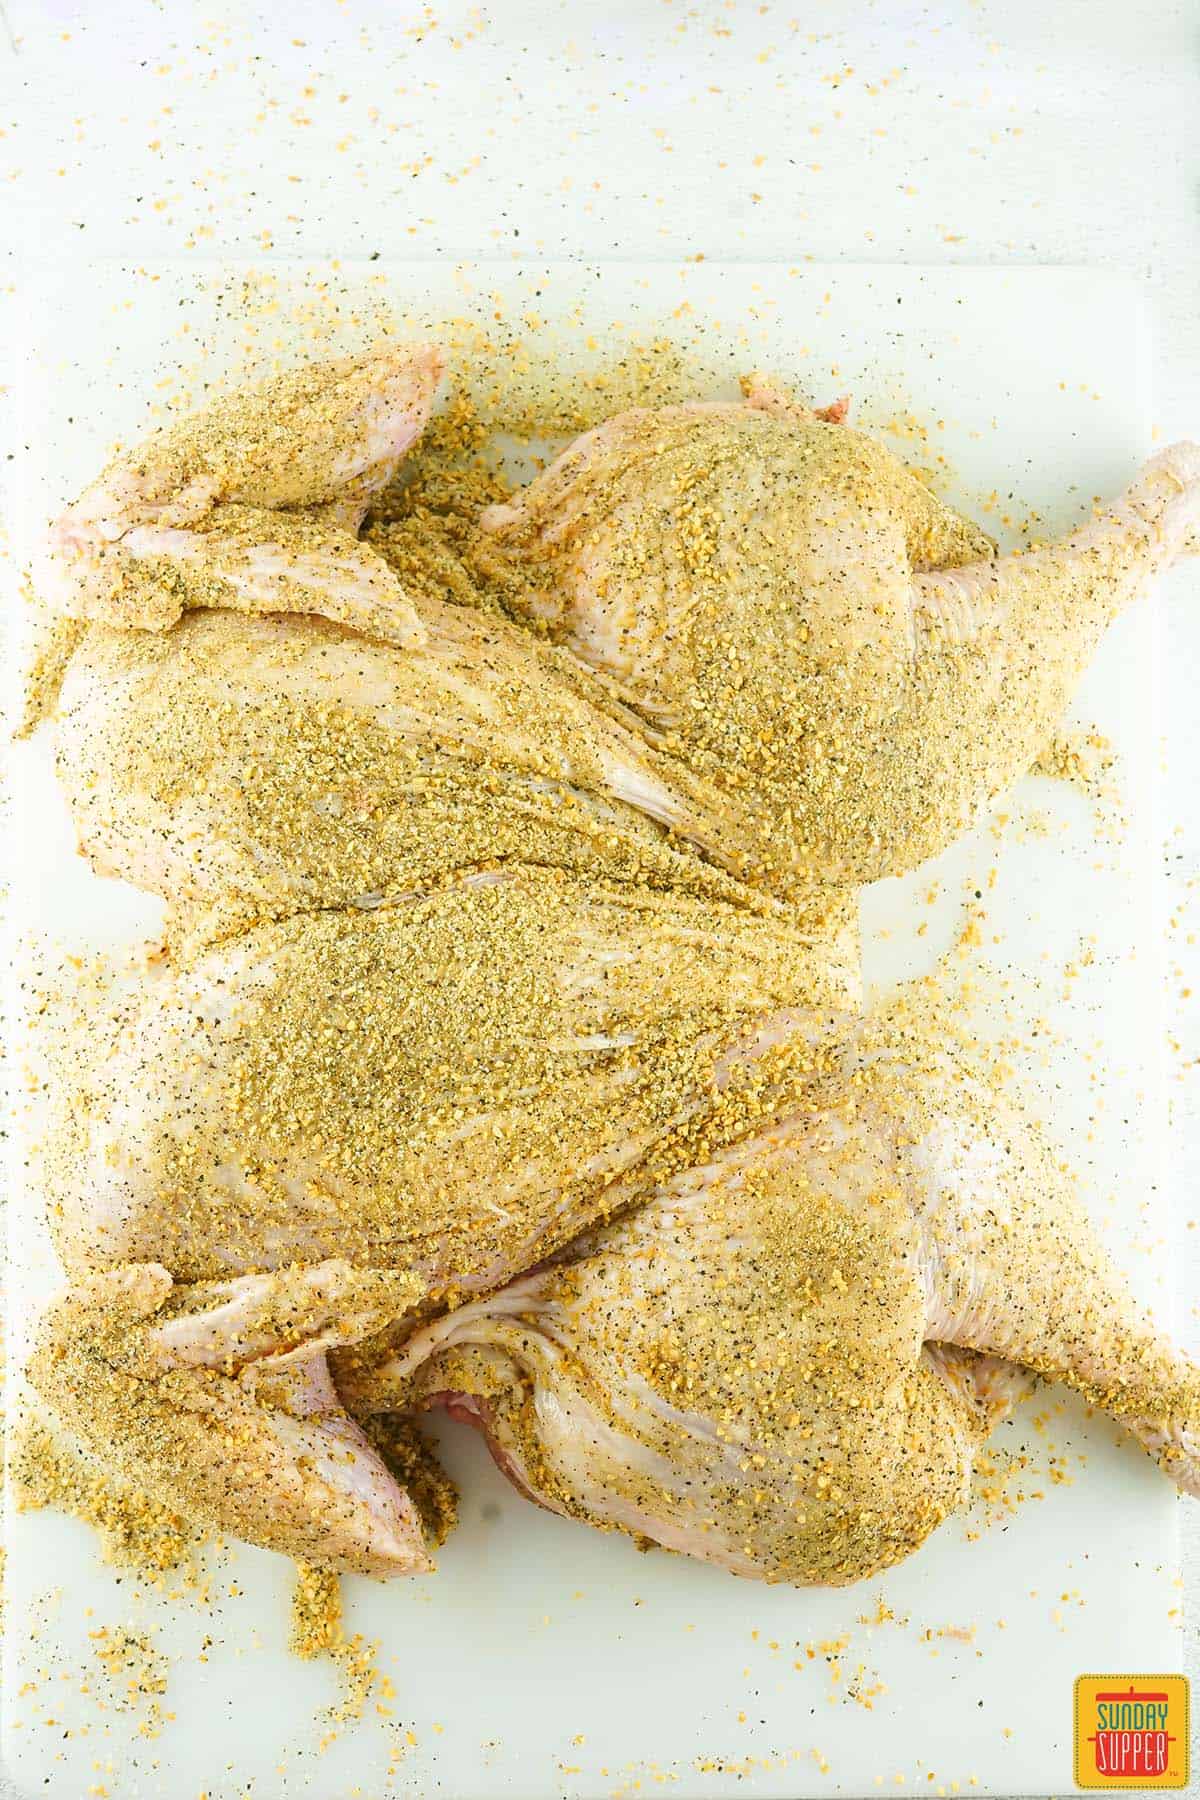 dry brined turkey ready to cook